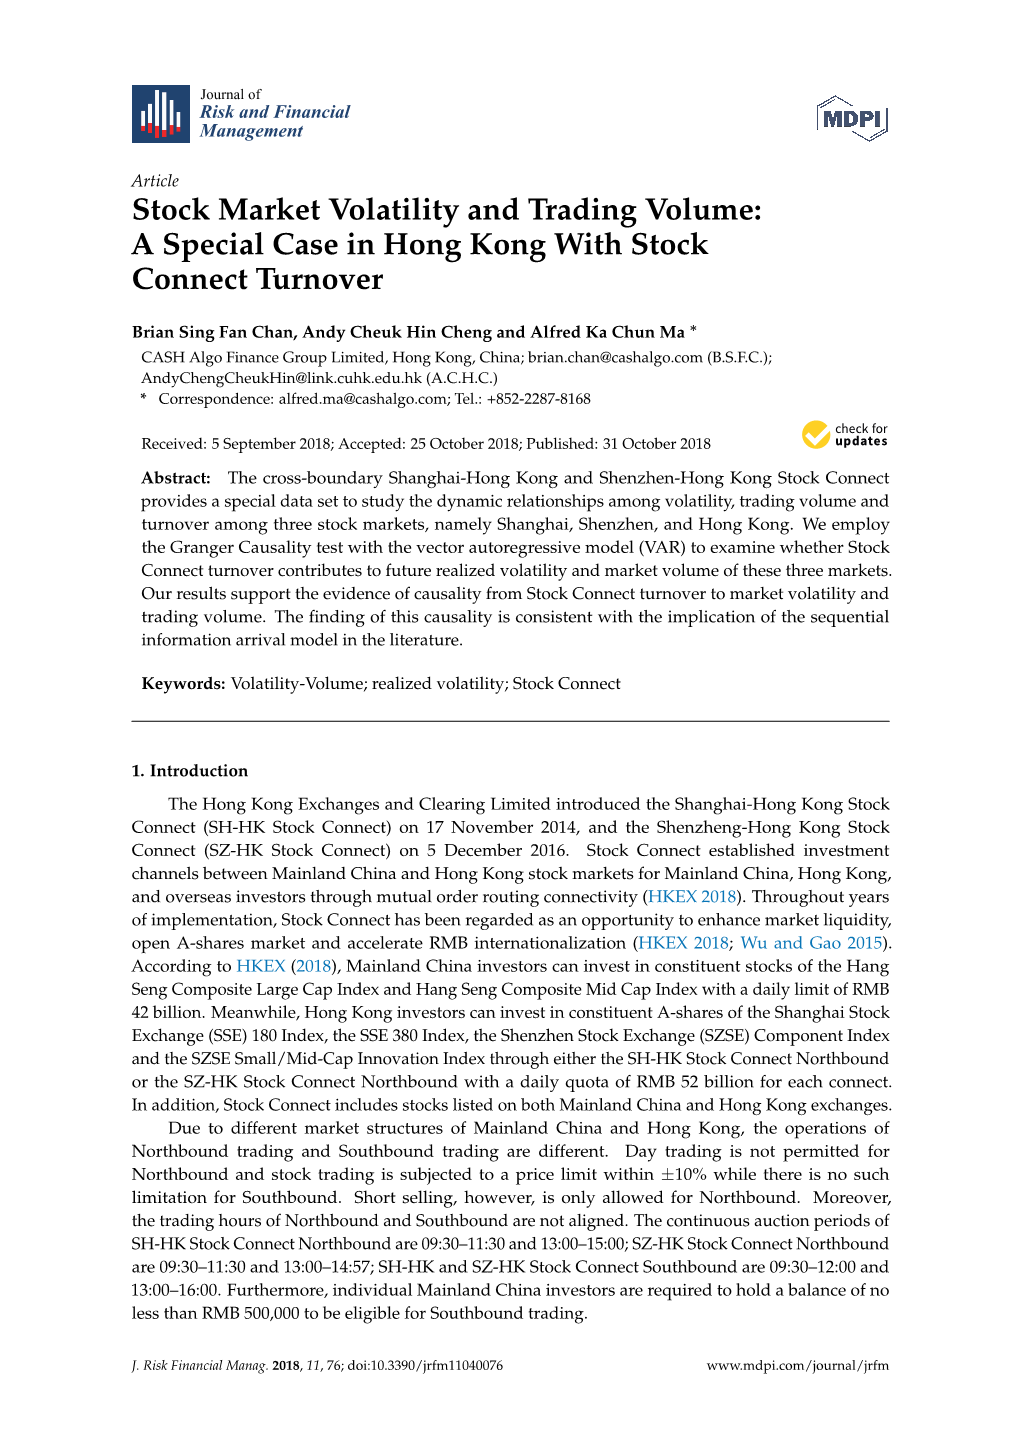 A Special Case in Hong Kong with Stock Connect Turnover